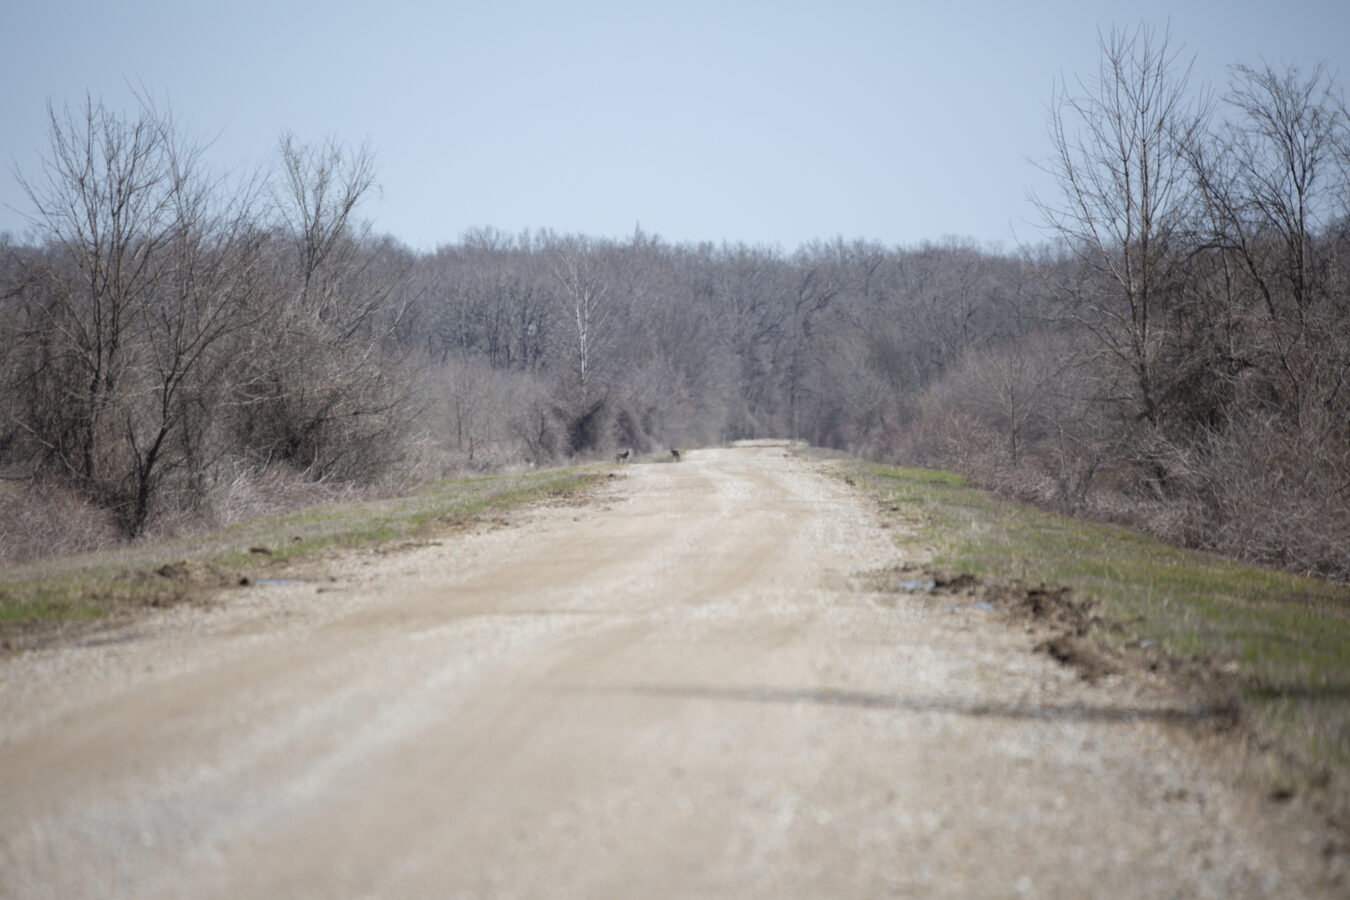 Pair of out of focus coyotes down a desolate dirt road